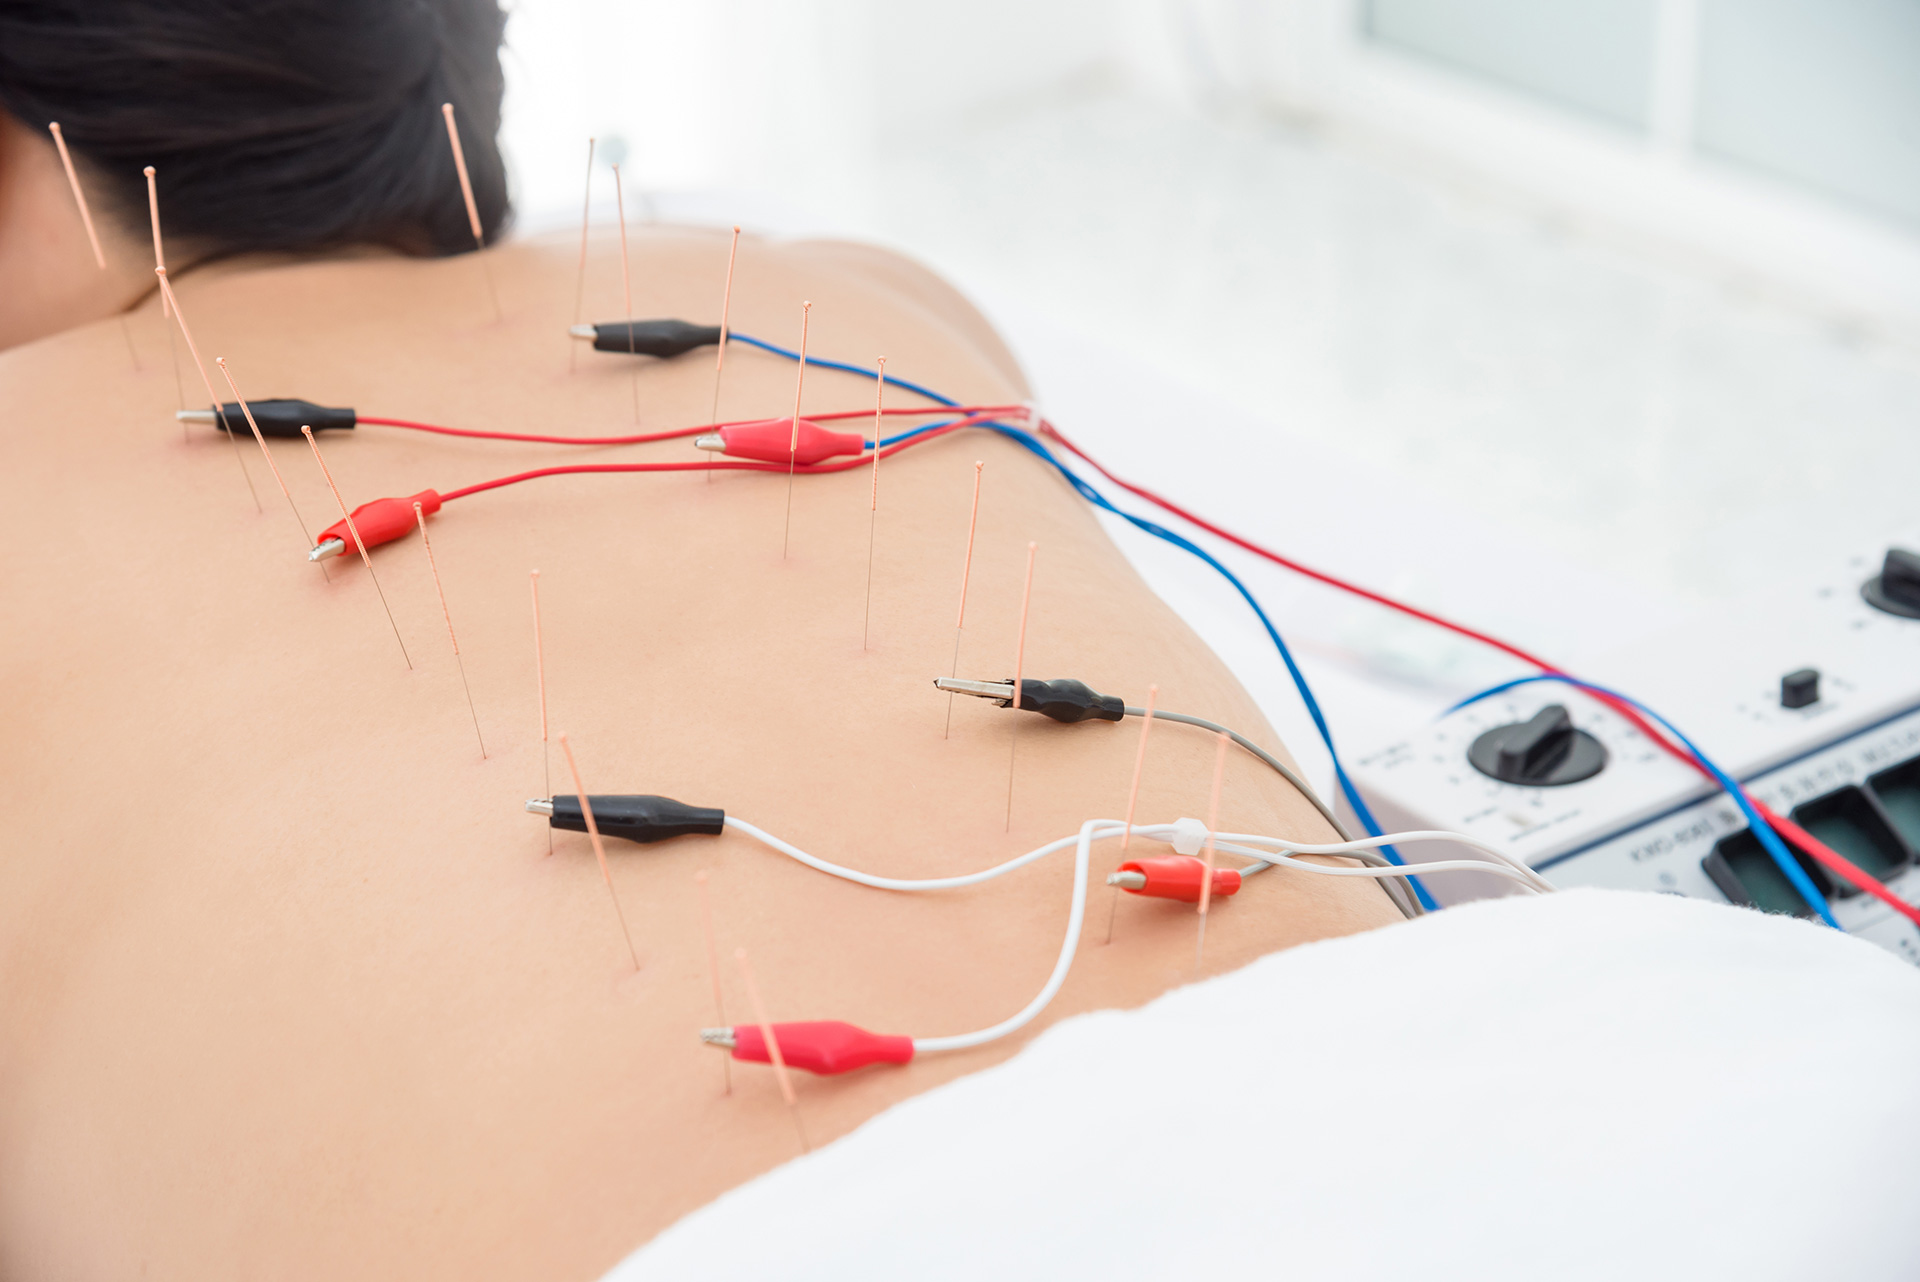 Standardized 8-point protocol of electrical dry needling for PF.